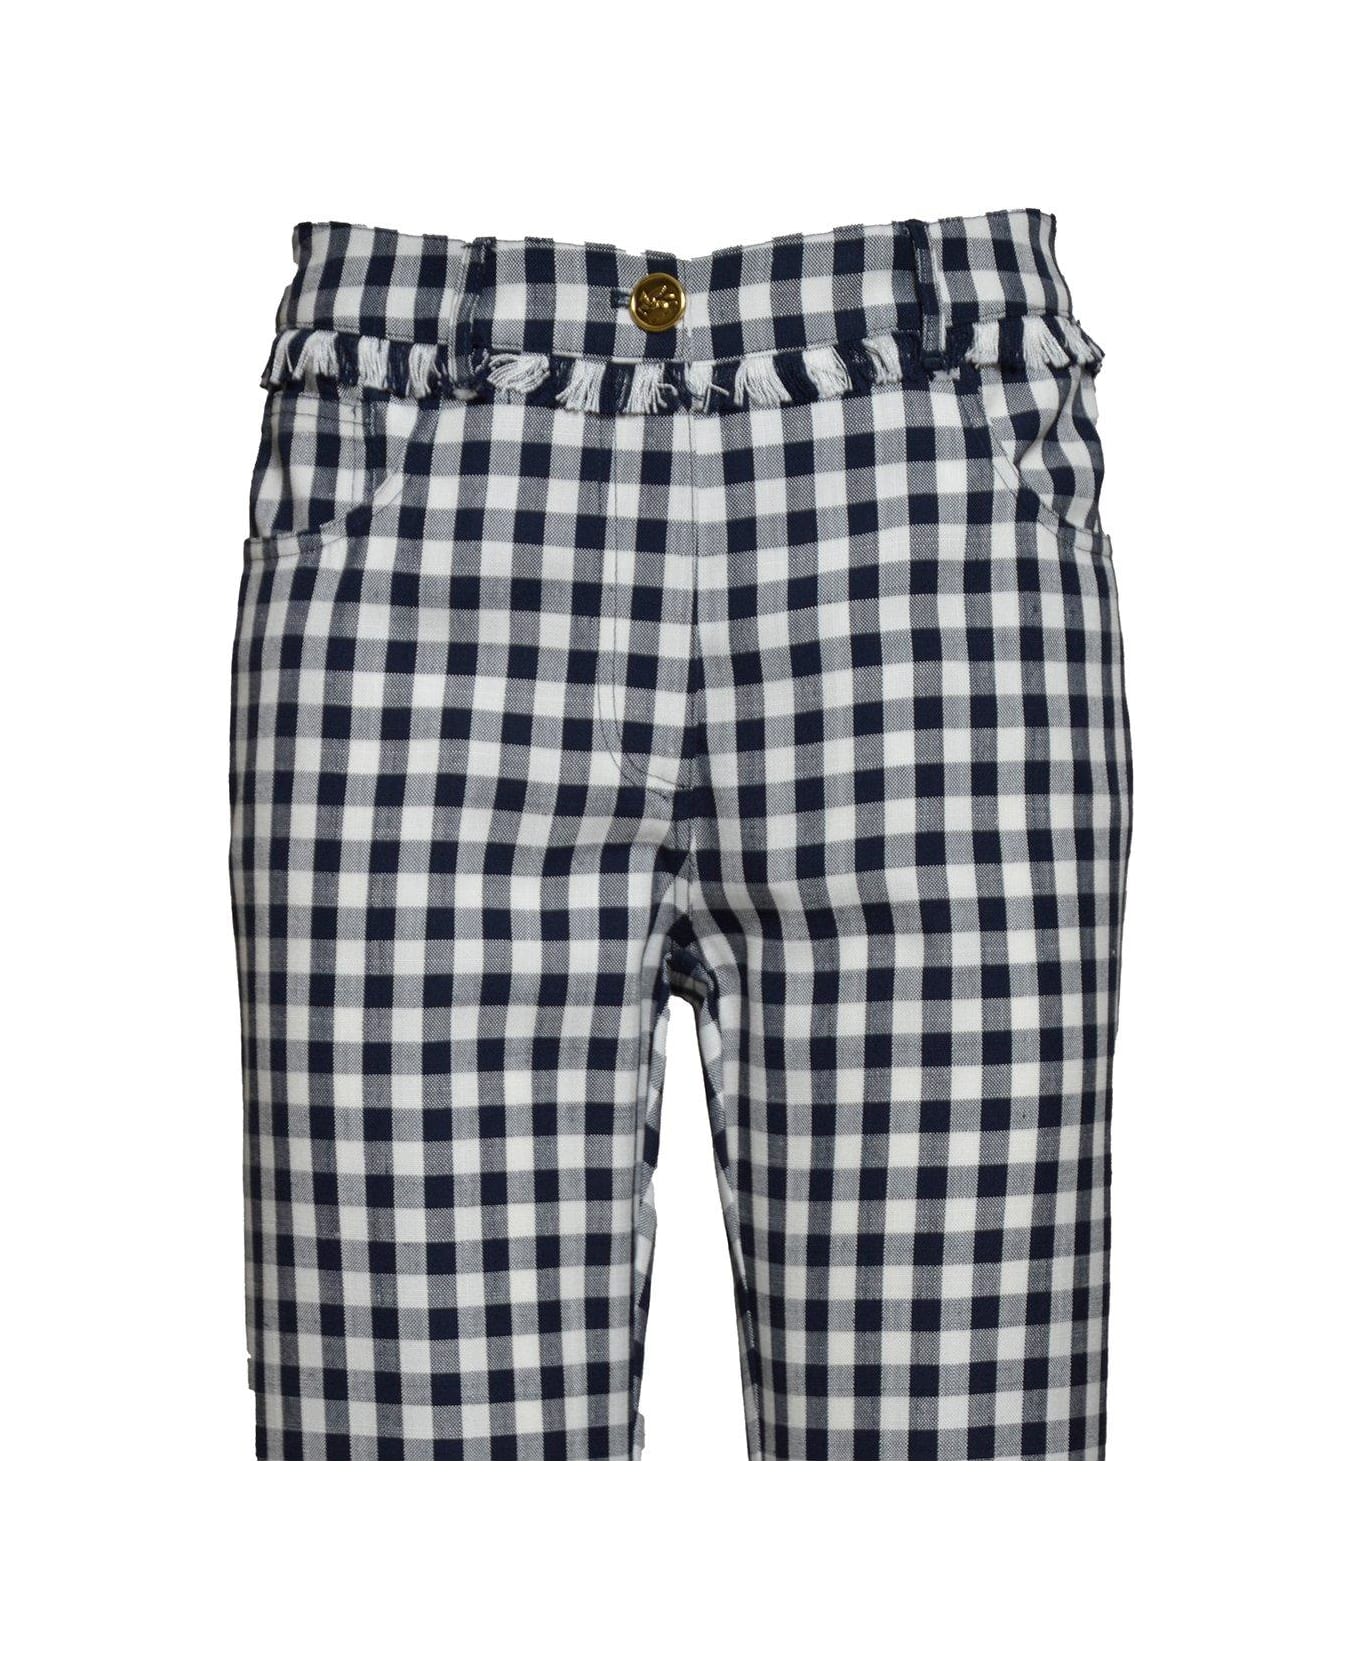 Etro Mid Rise Gingham Checked Trousers - Bianco/nero